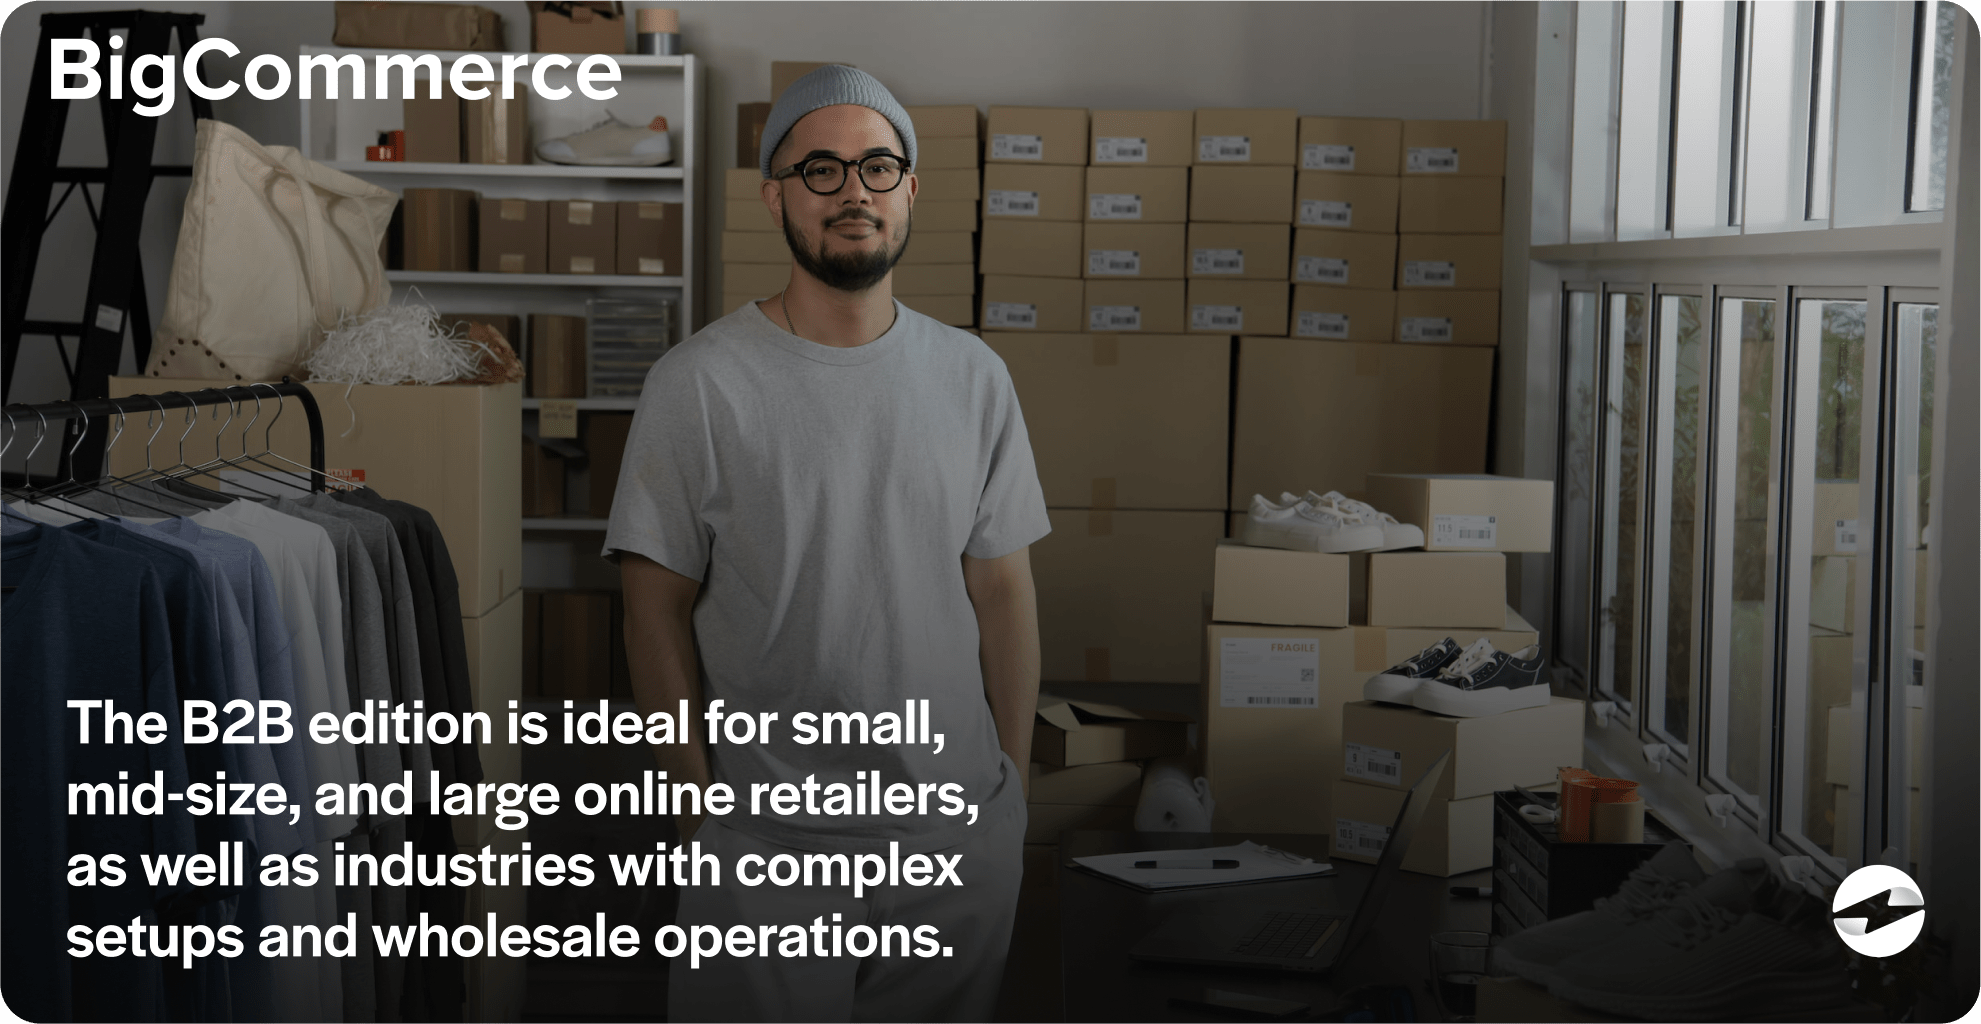 Which businesses benefit from BigCommerce for B2B?